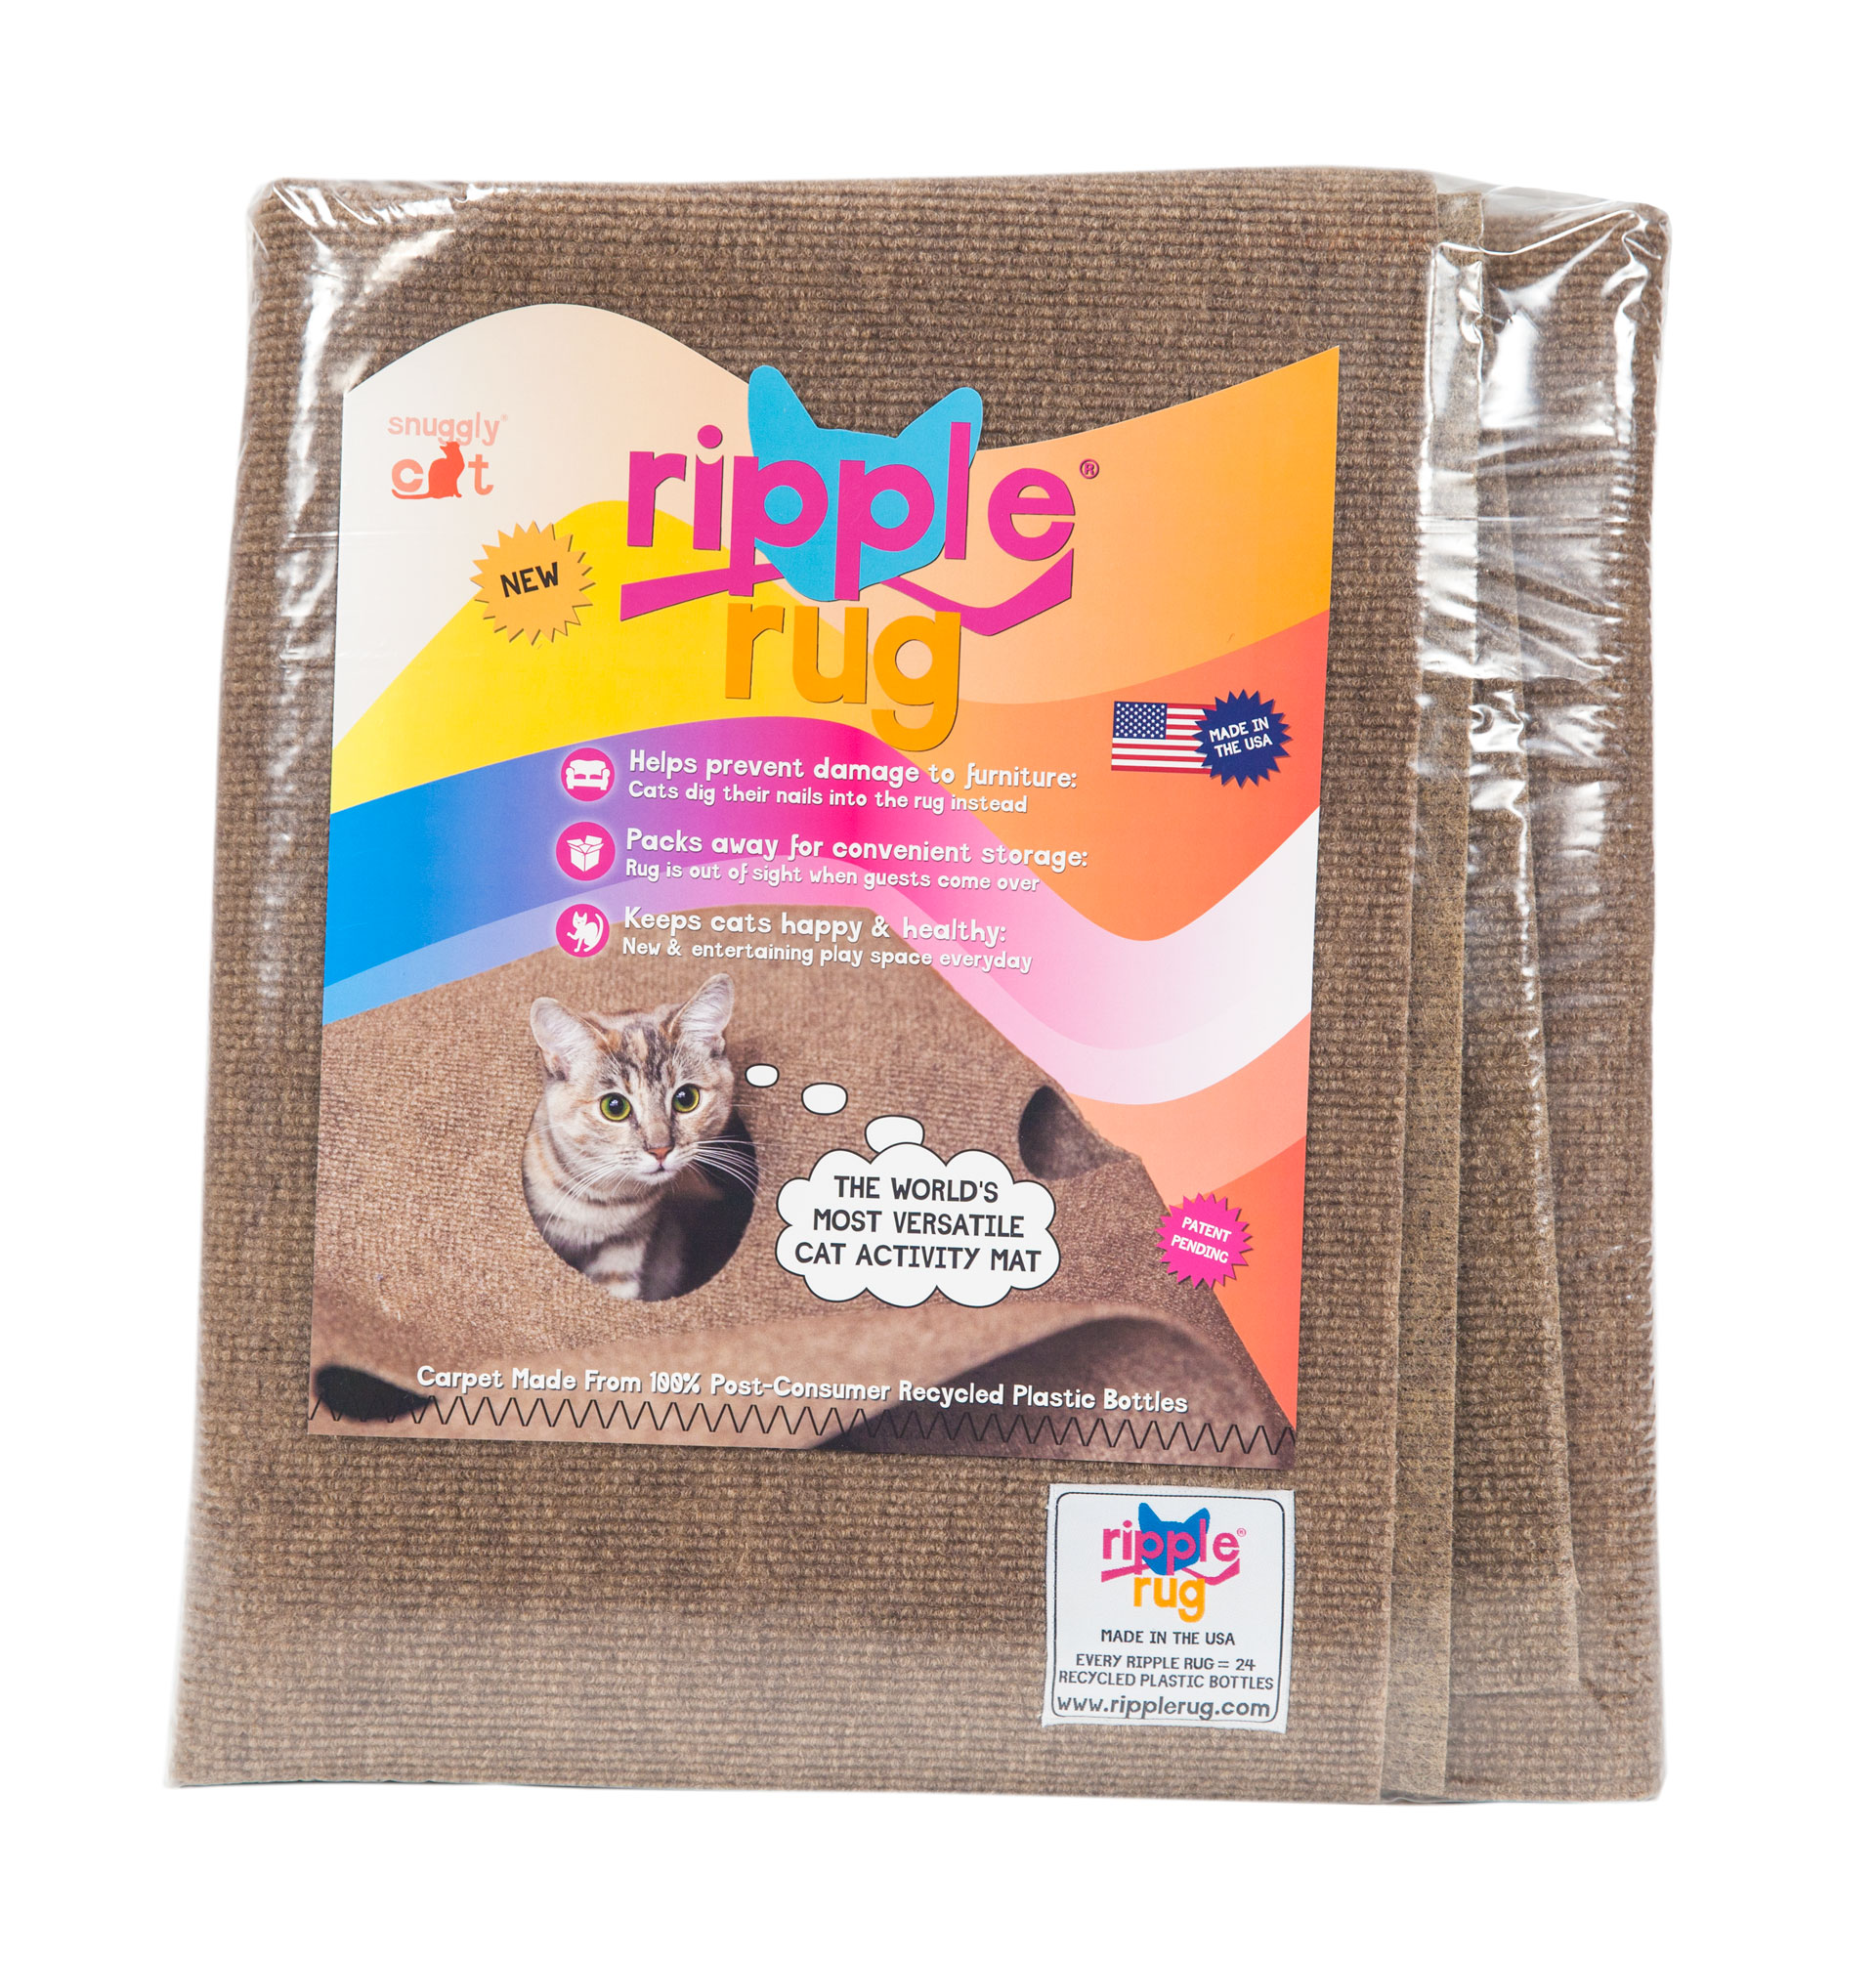 The Ripple Rug - Pet Category Winner of NBC Today's Next Big Thing